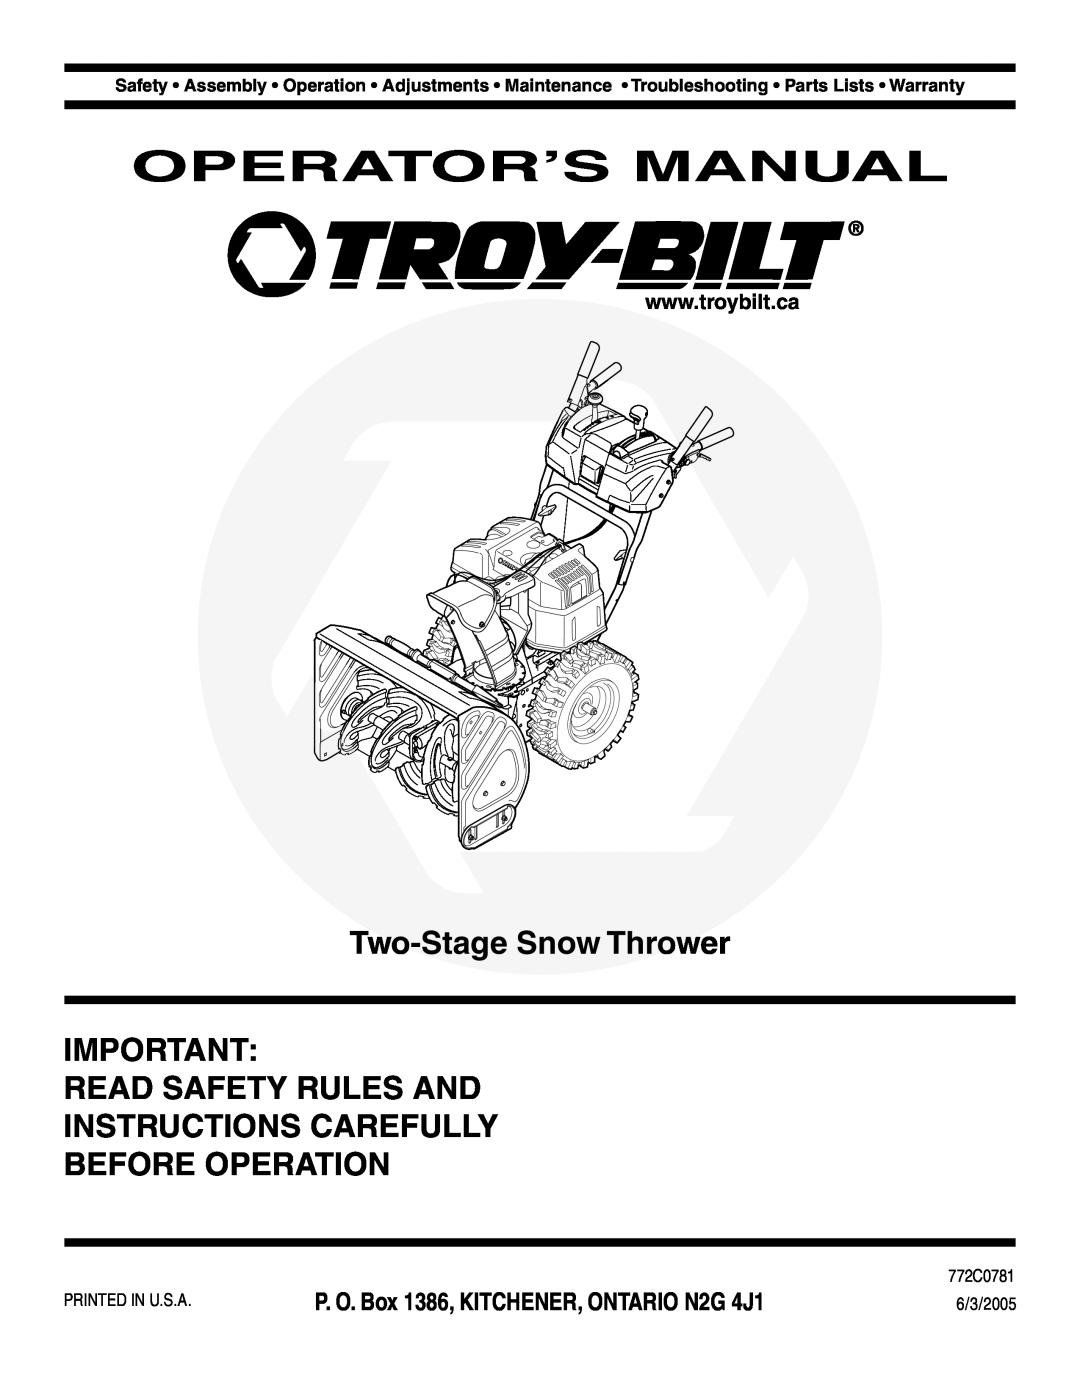 Troy-Bilt Two-Stage Snow Thrower warranty Operator’S Manual, Read Safety Rules And Instructions Carefully Before Operation 